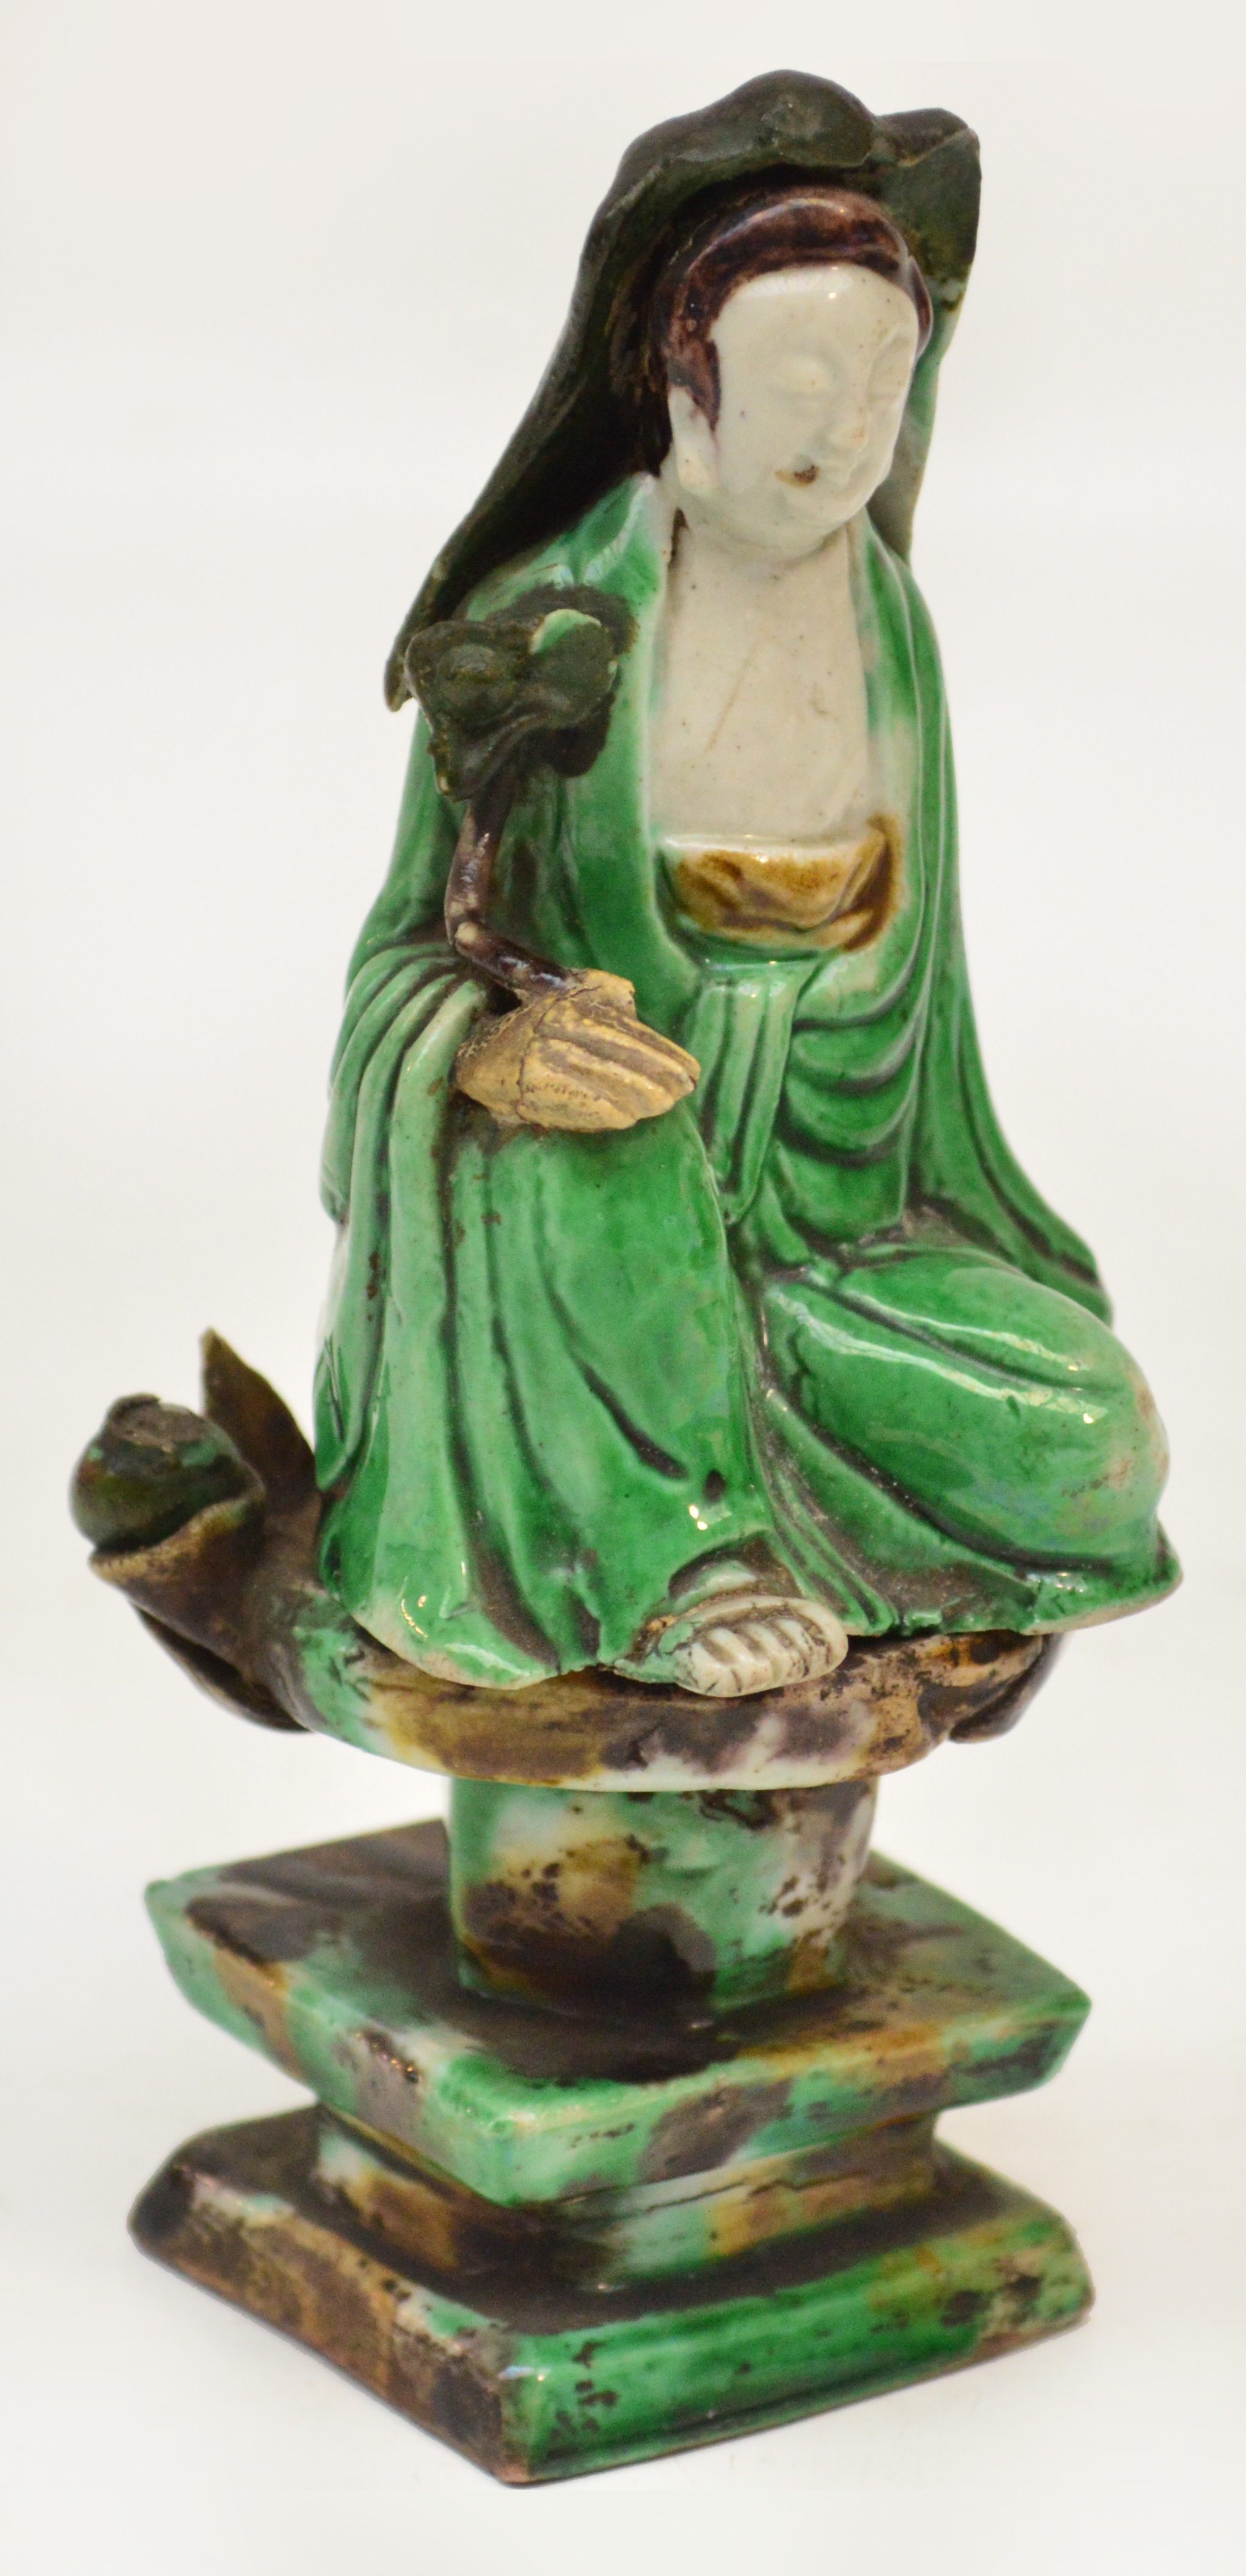 A Chinese Kangxi Sancai glazed model of a deity seated upon a lotus throne, bears label "No.442